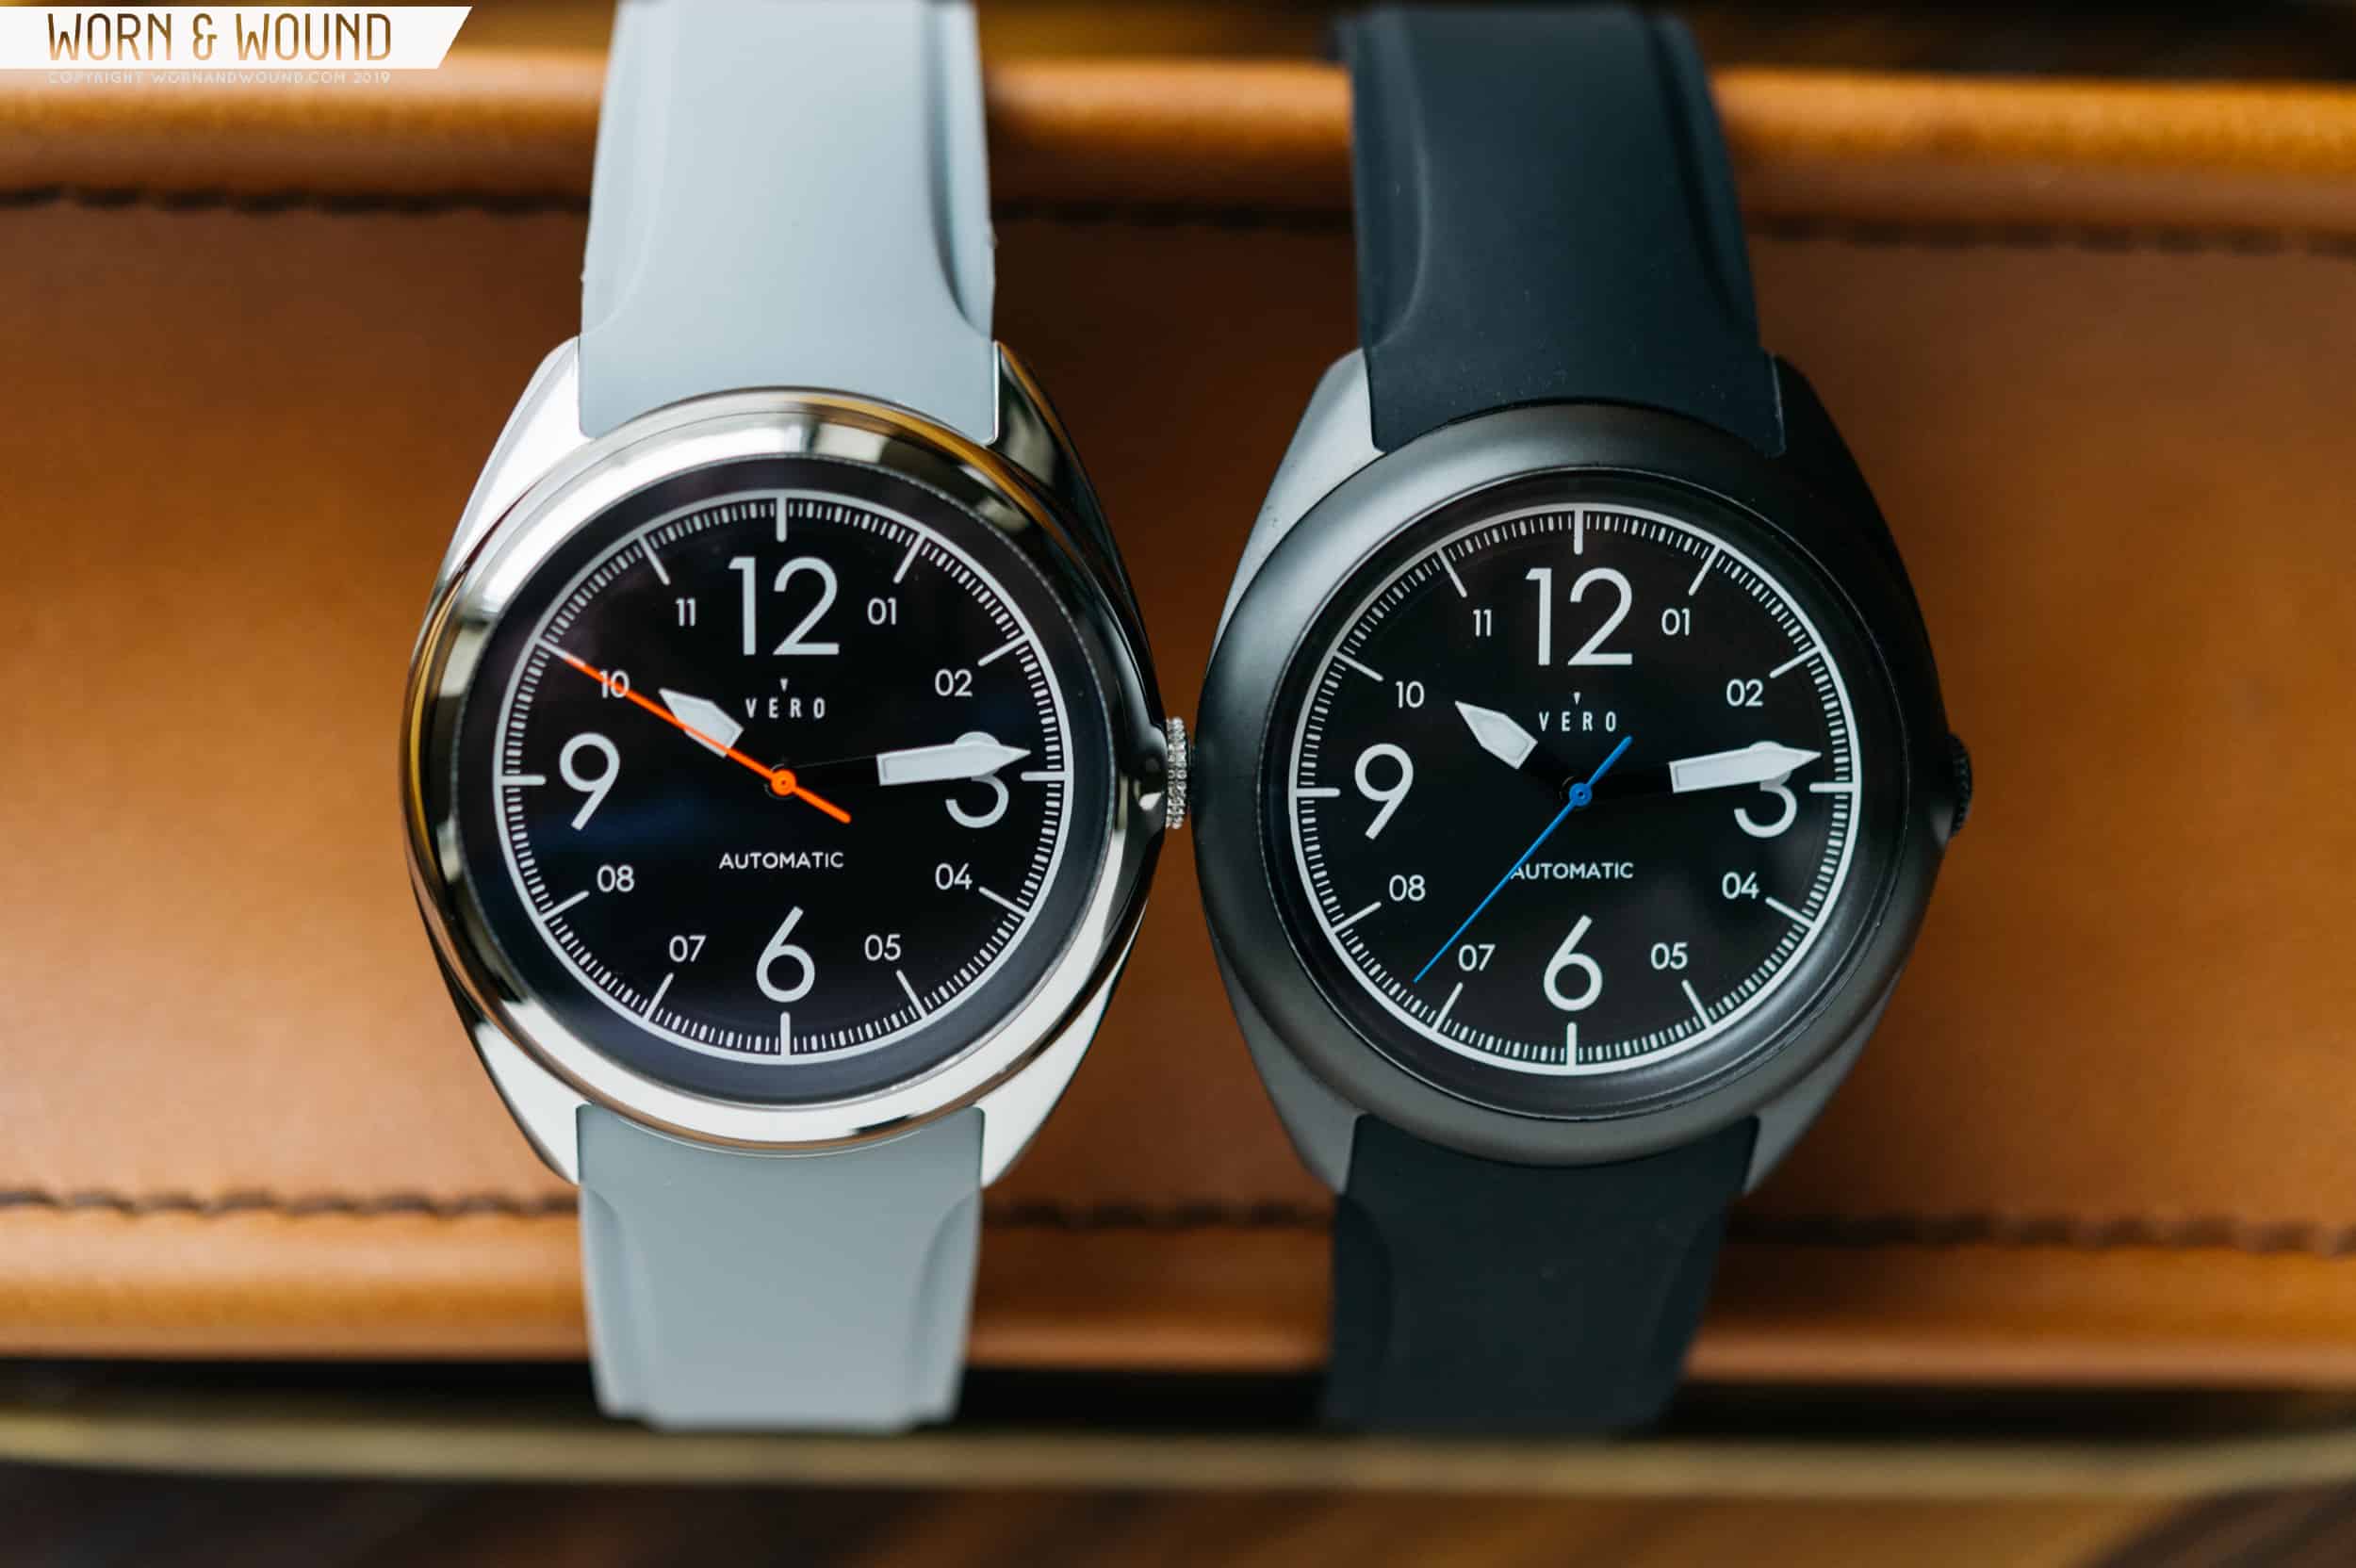 Vero SW Watch Review 5 - Recapping 2019: Our 10 Favorite Watch Reviews of the Year